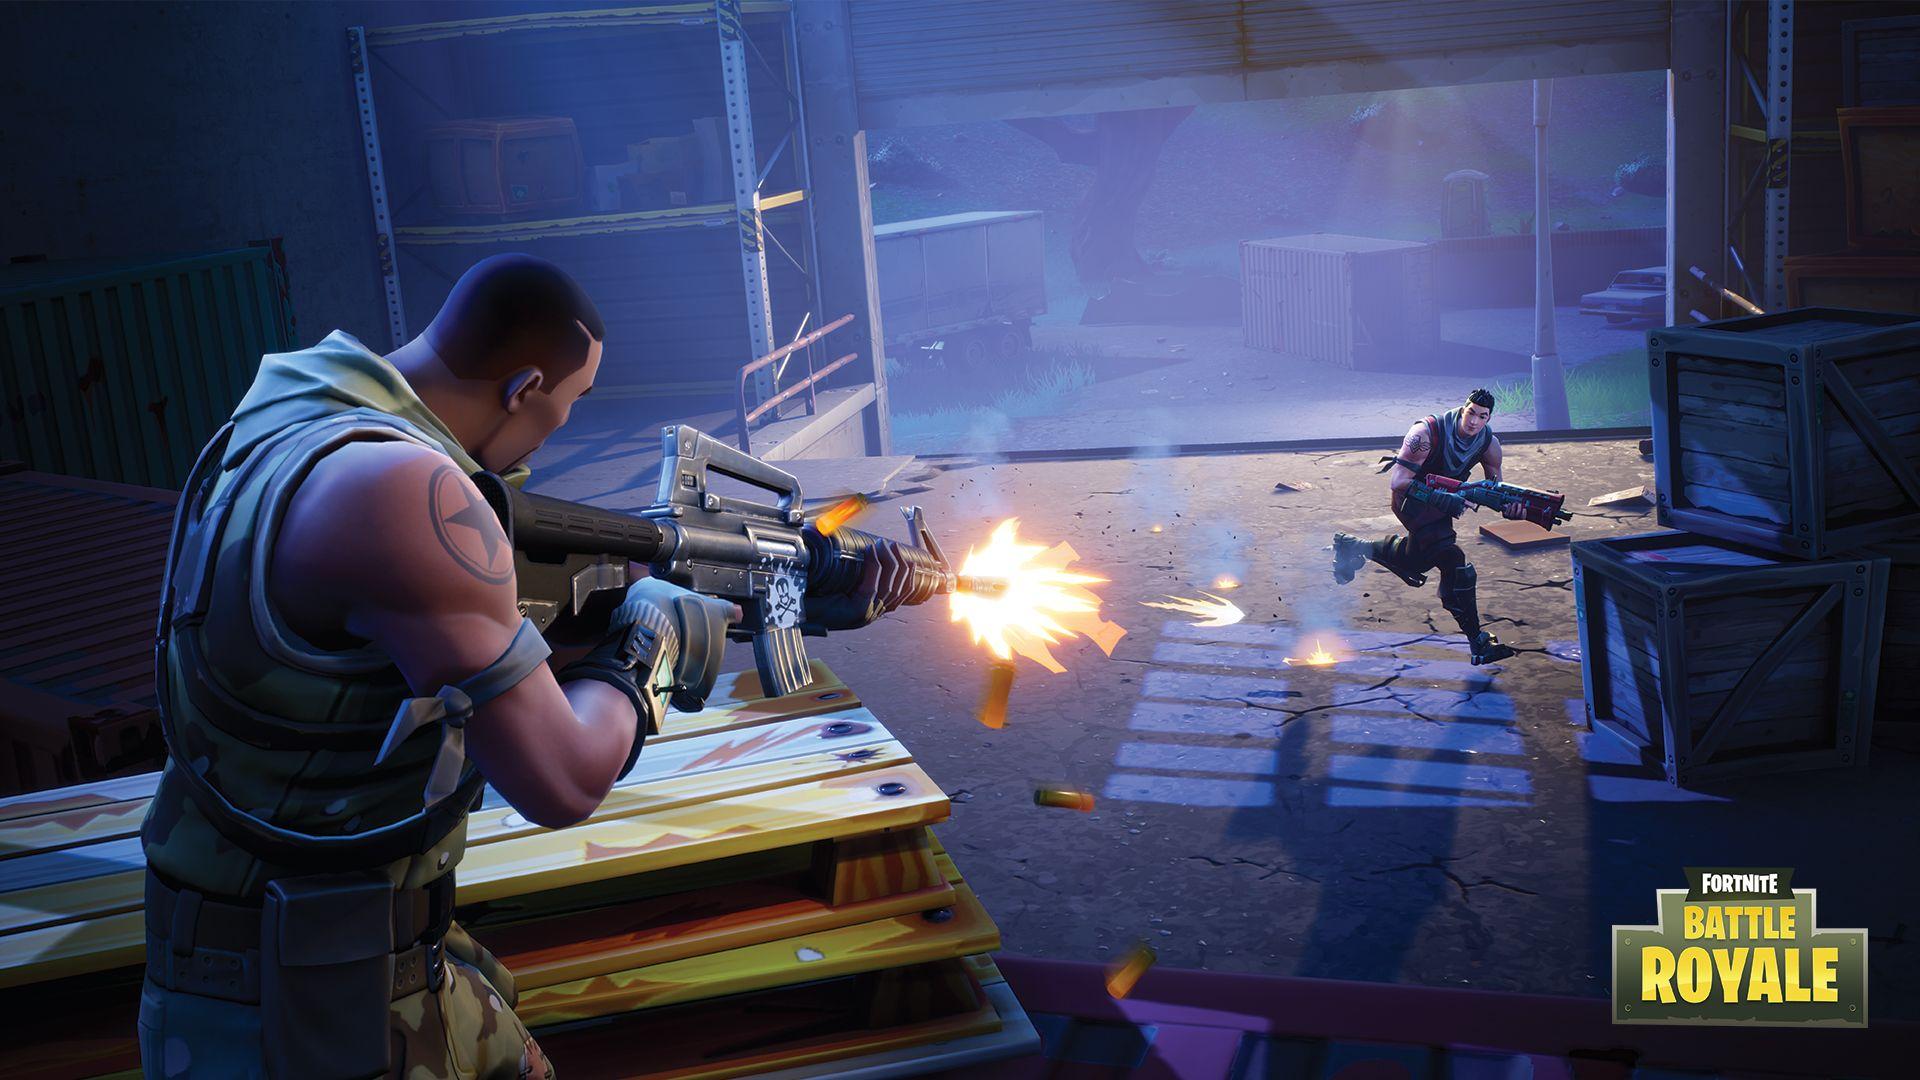 Fortnite Battle Royale Mode Coming September 26 to Xbox One